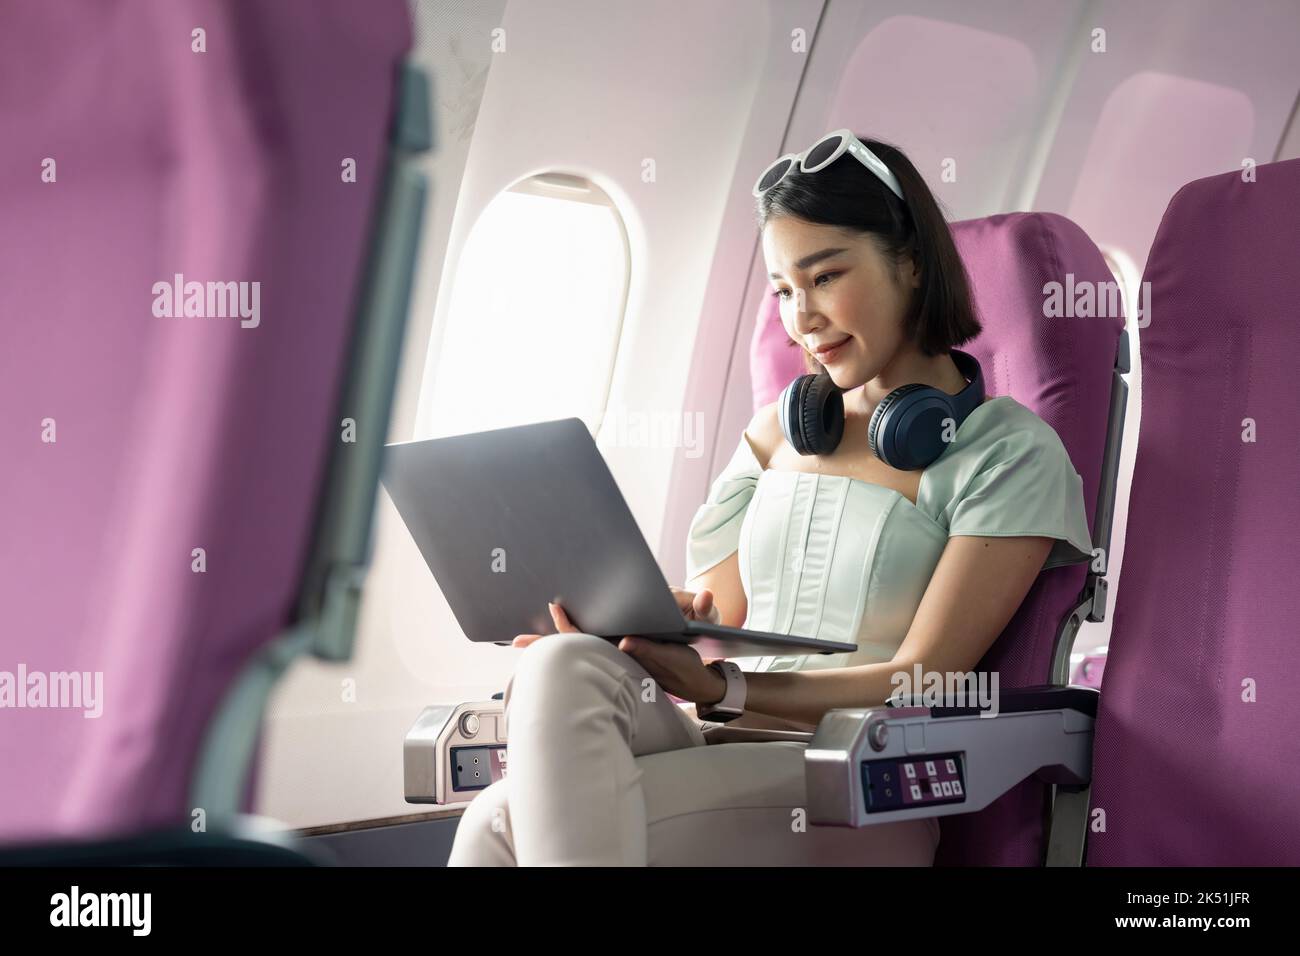 Attractive asian woman passenger of airplane using laptop computer and wifi on board. tourism traveler concept. Stock Photo